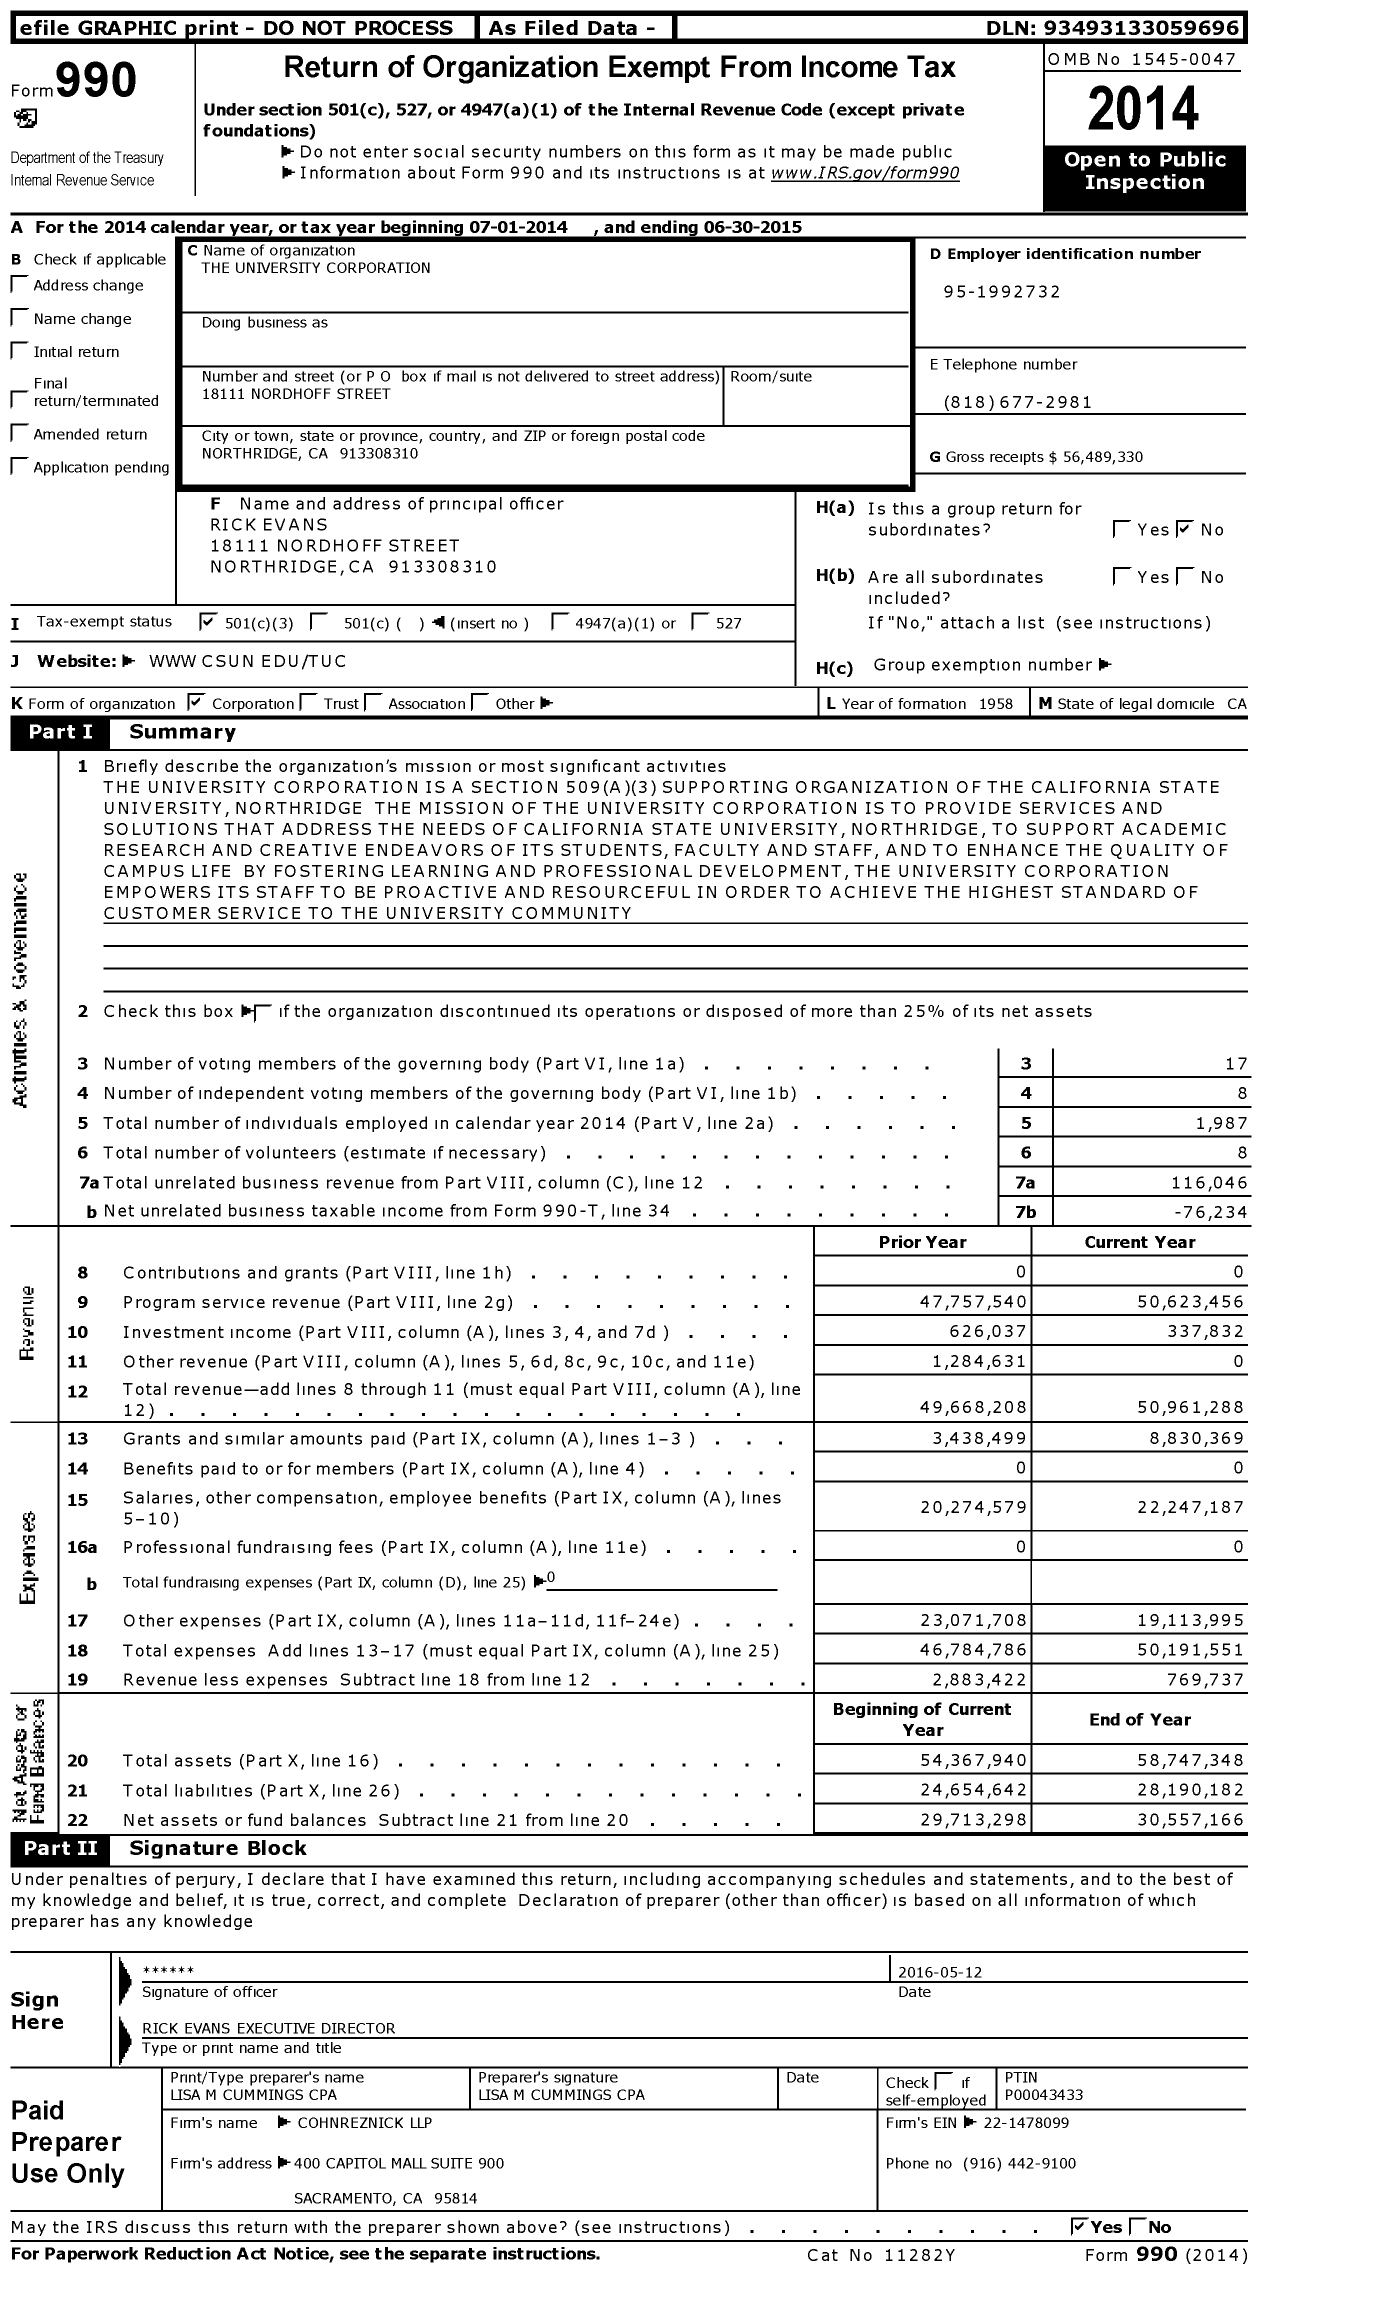 Image of first page of 2014 Form 990 for The University Corporation (TUC)